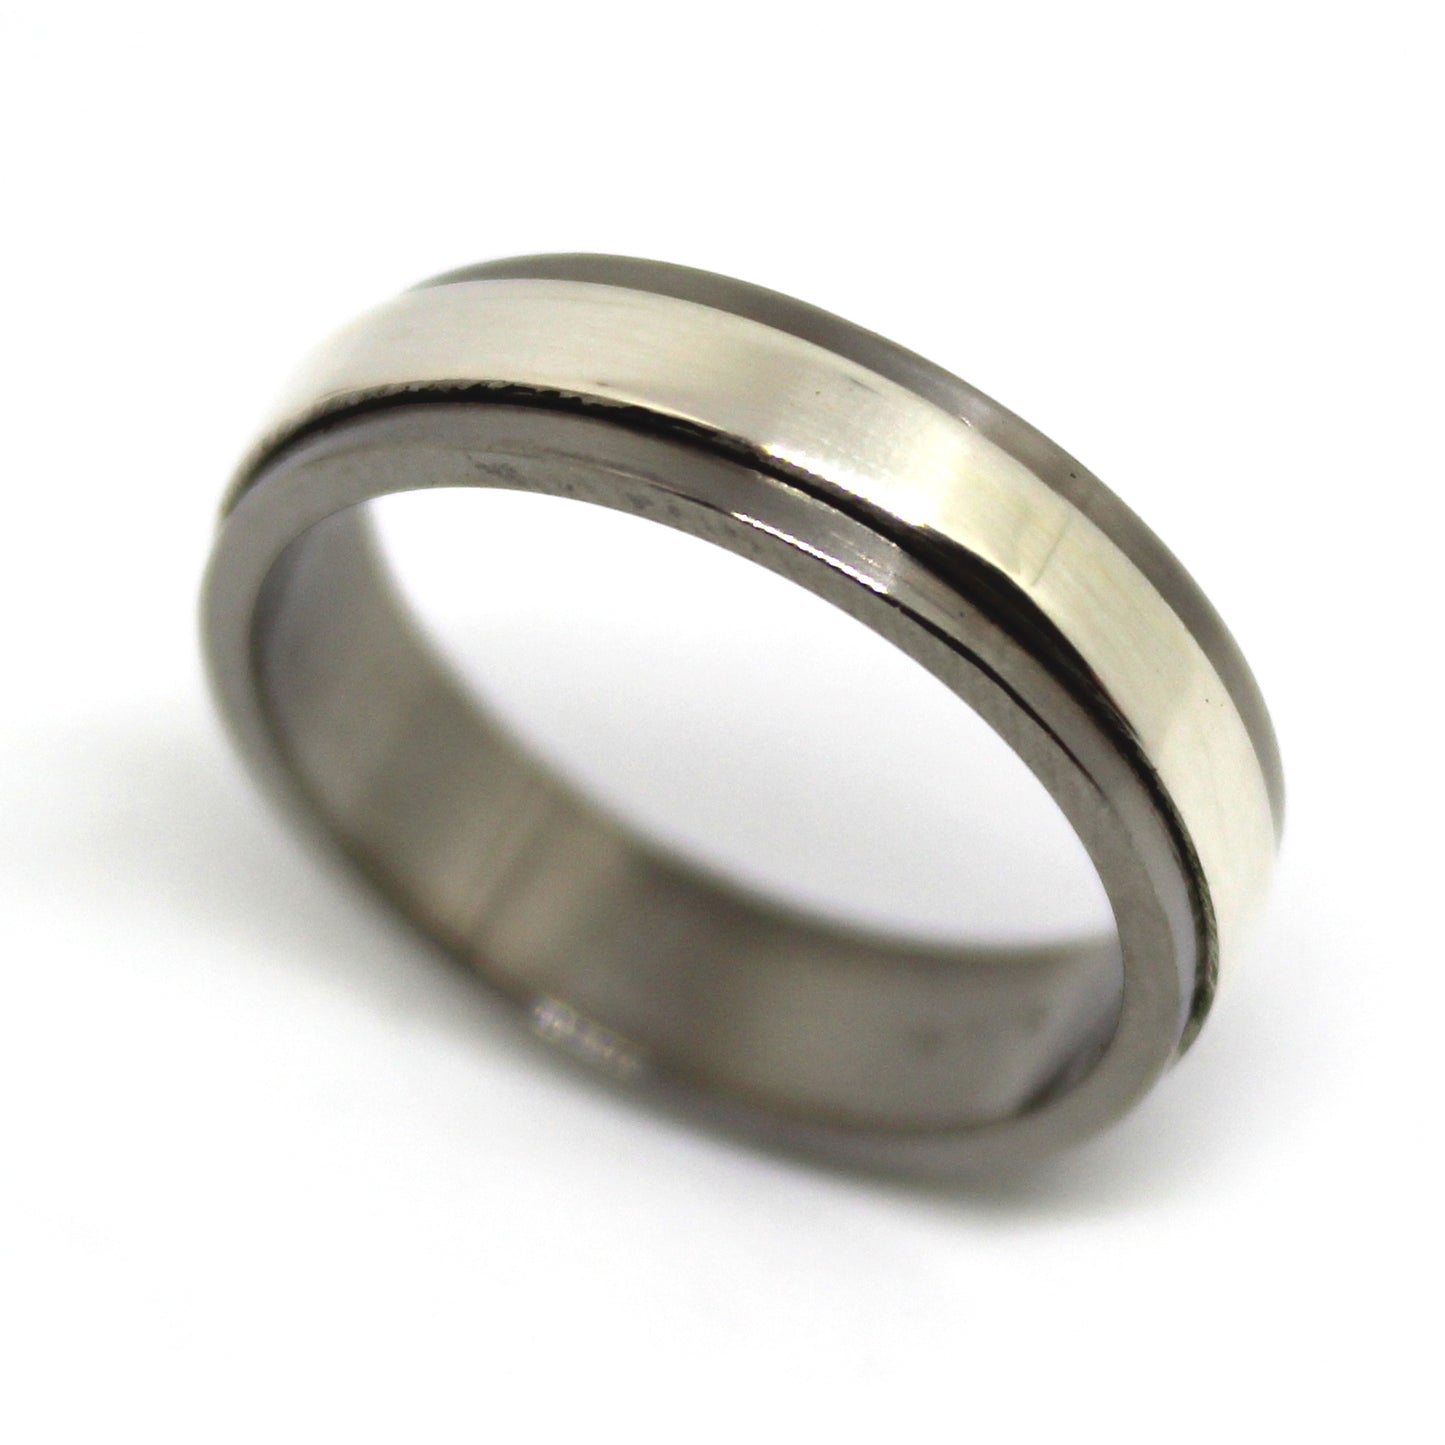 Akley Jewellers sterling silver ring has been mechanically constructed to spin independently of its titanium band